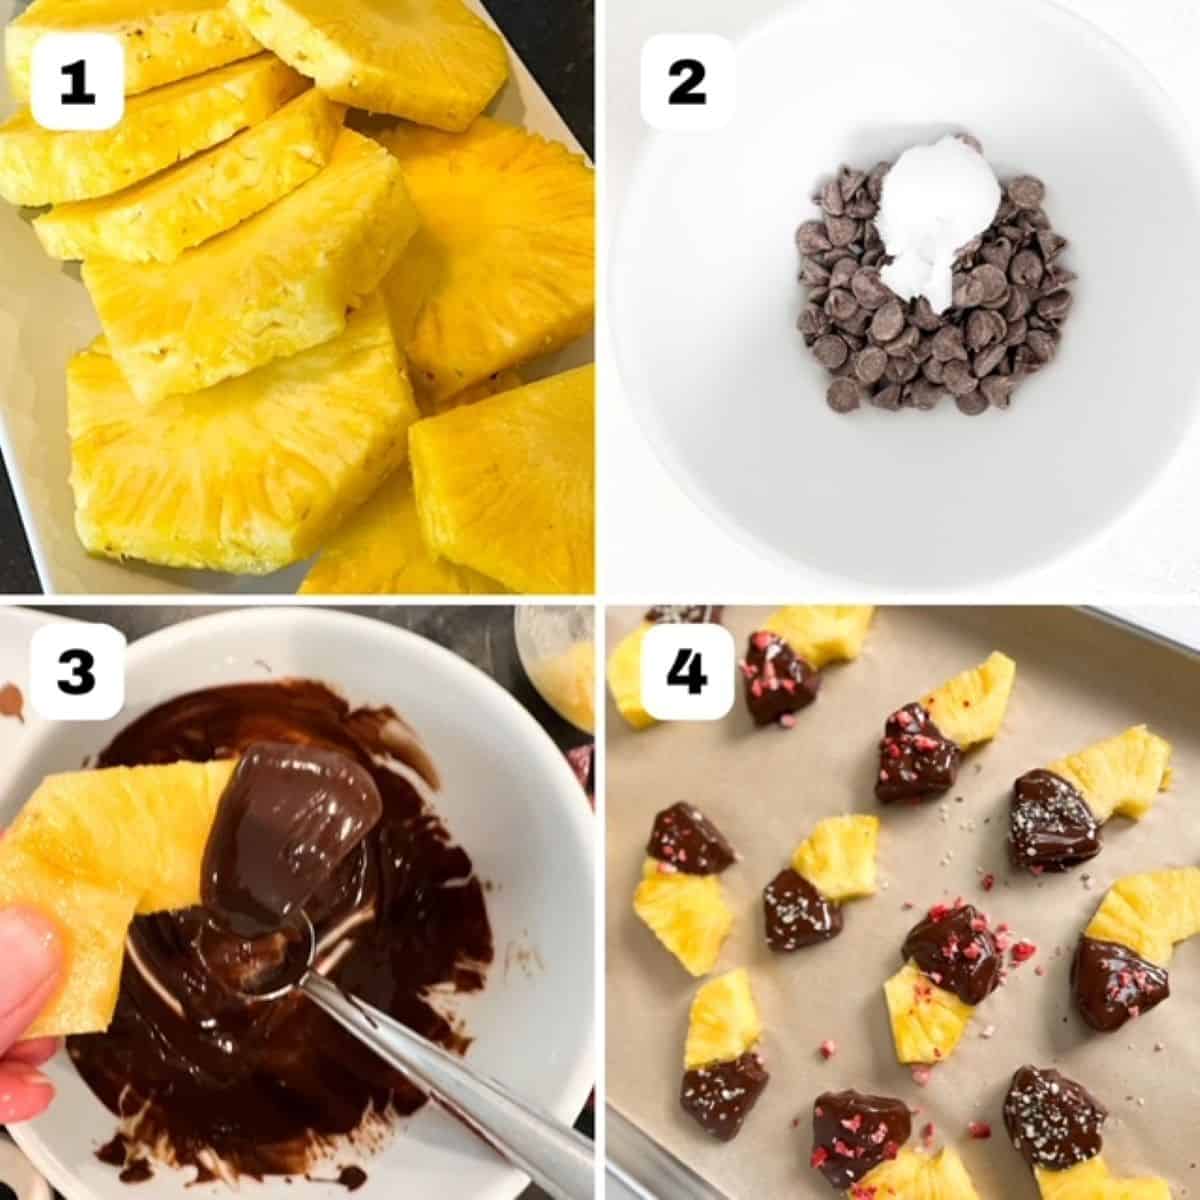 Four process images showing steps to make chocolate covered pineapple.